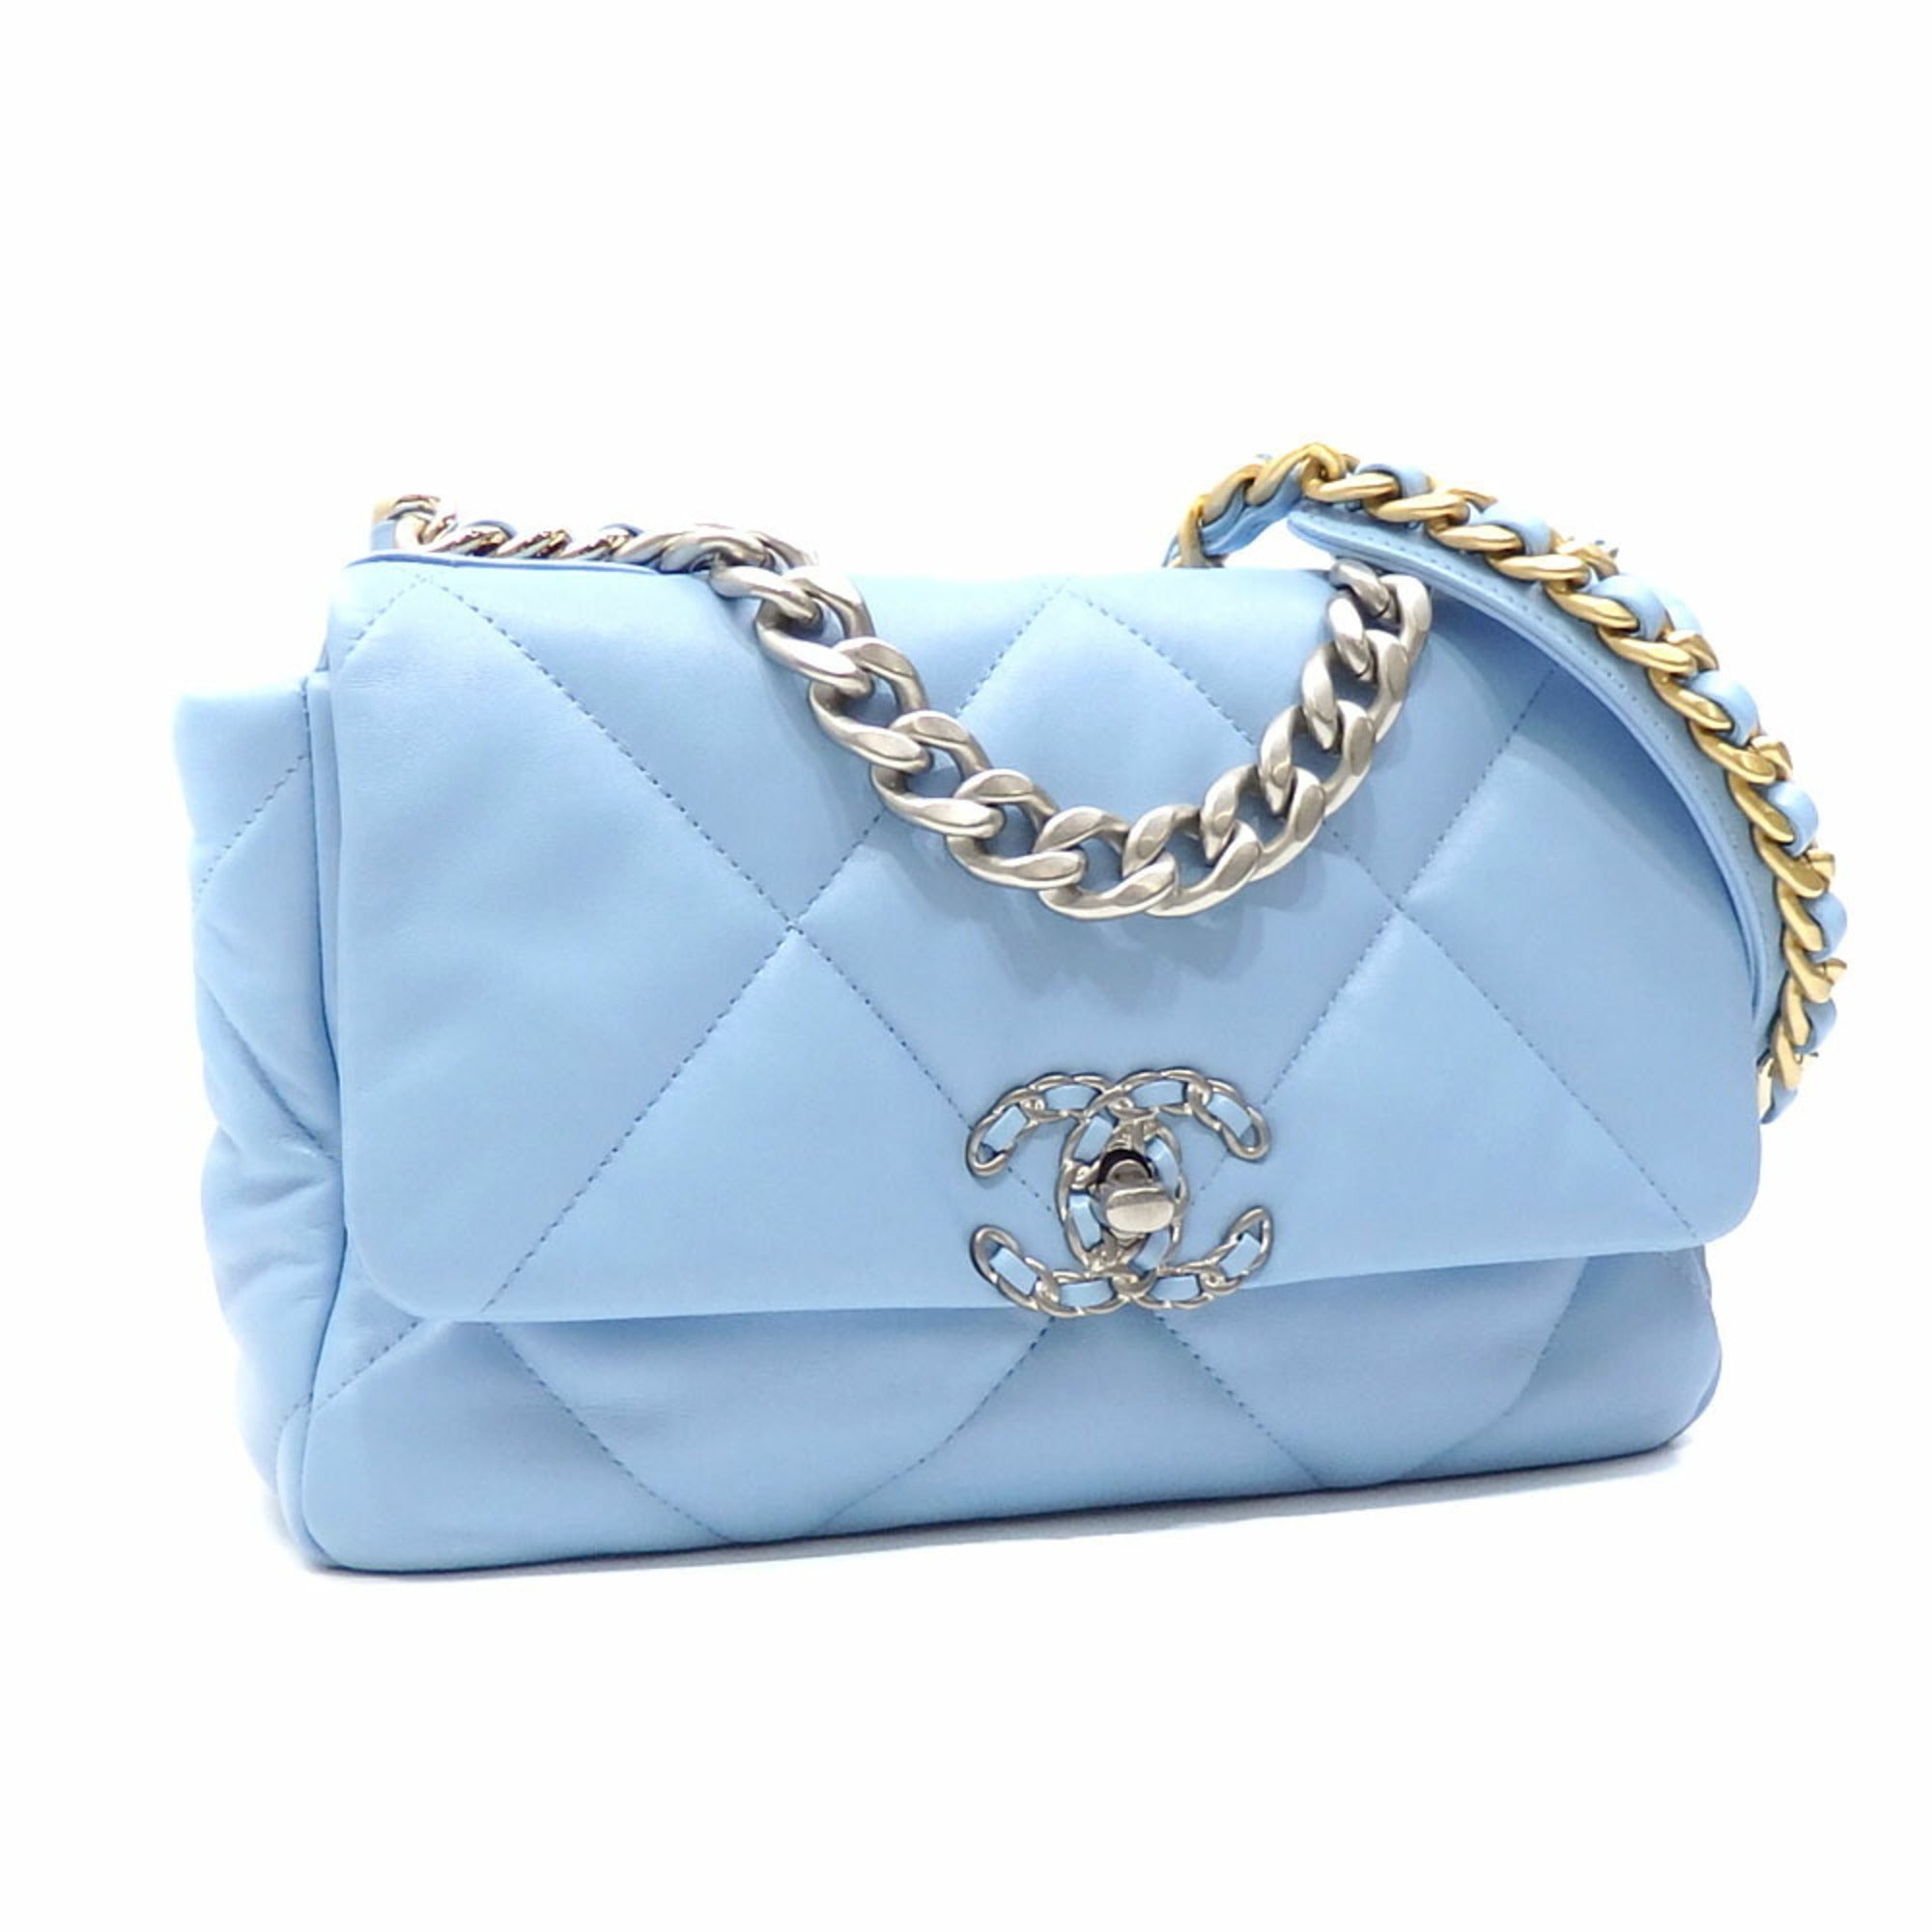 Chanel bag CHANEL 19 ladies light blue lambskin AS1160 hand leather co